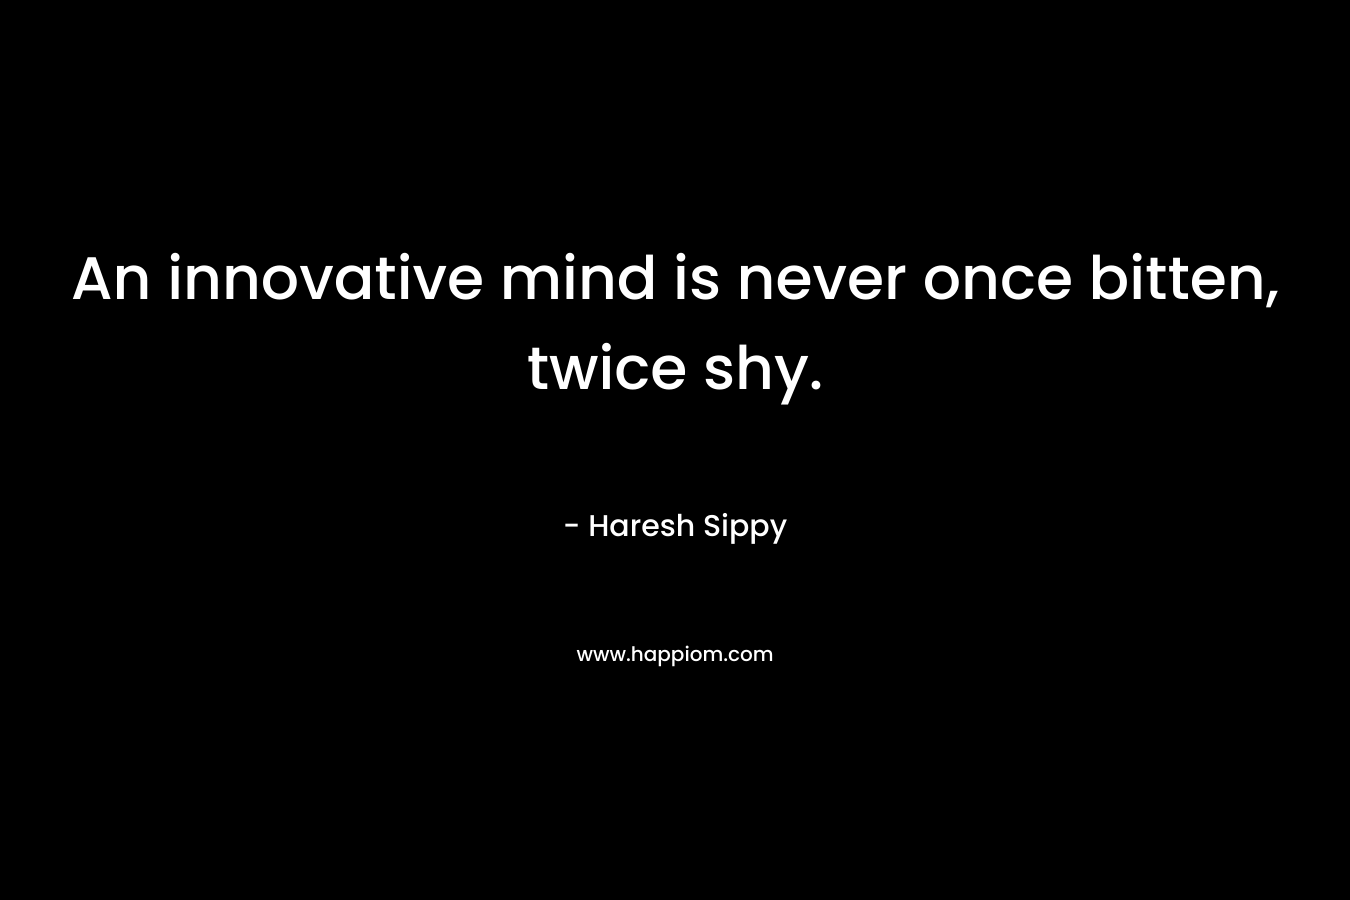 An innovative mind is never once bitten, twice shy. – Haresh Sippy